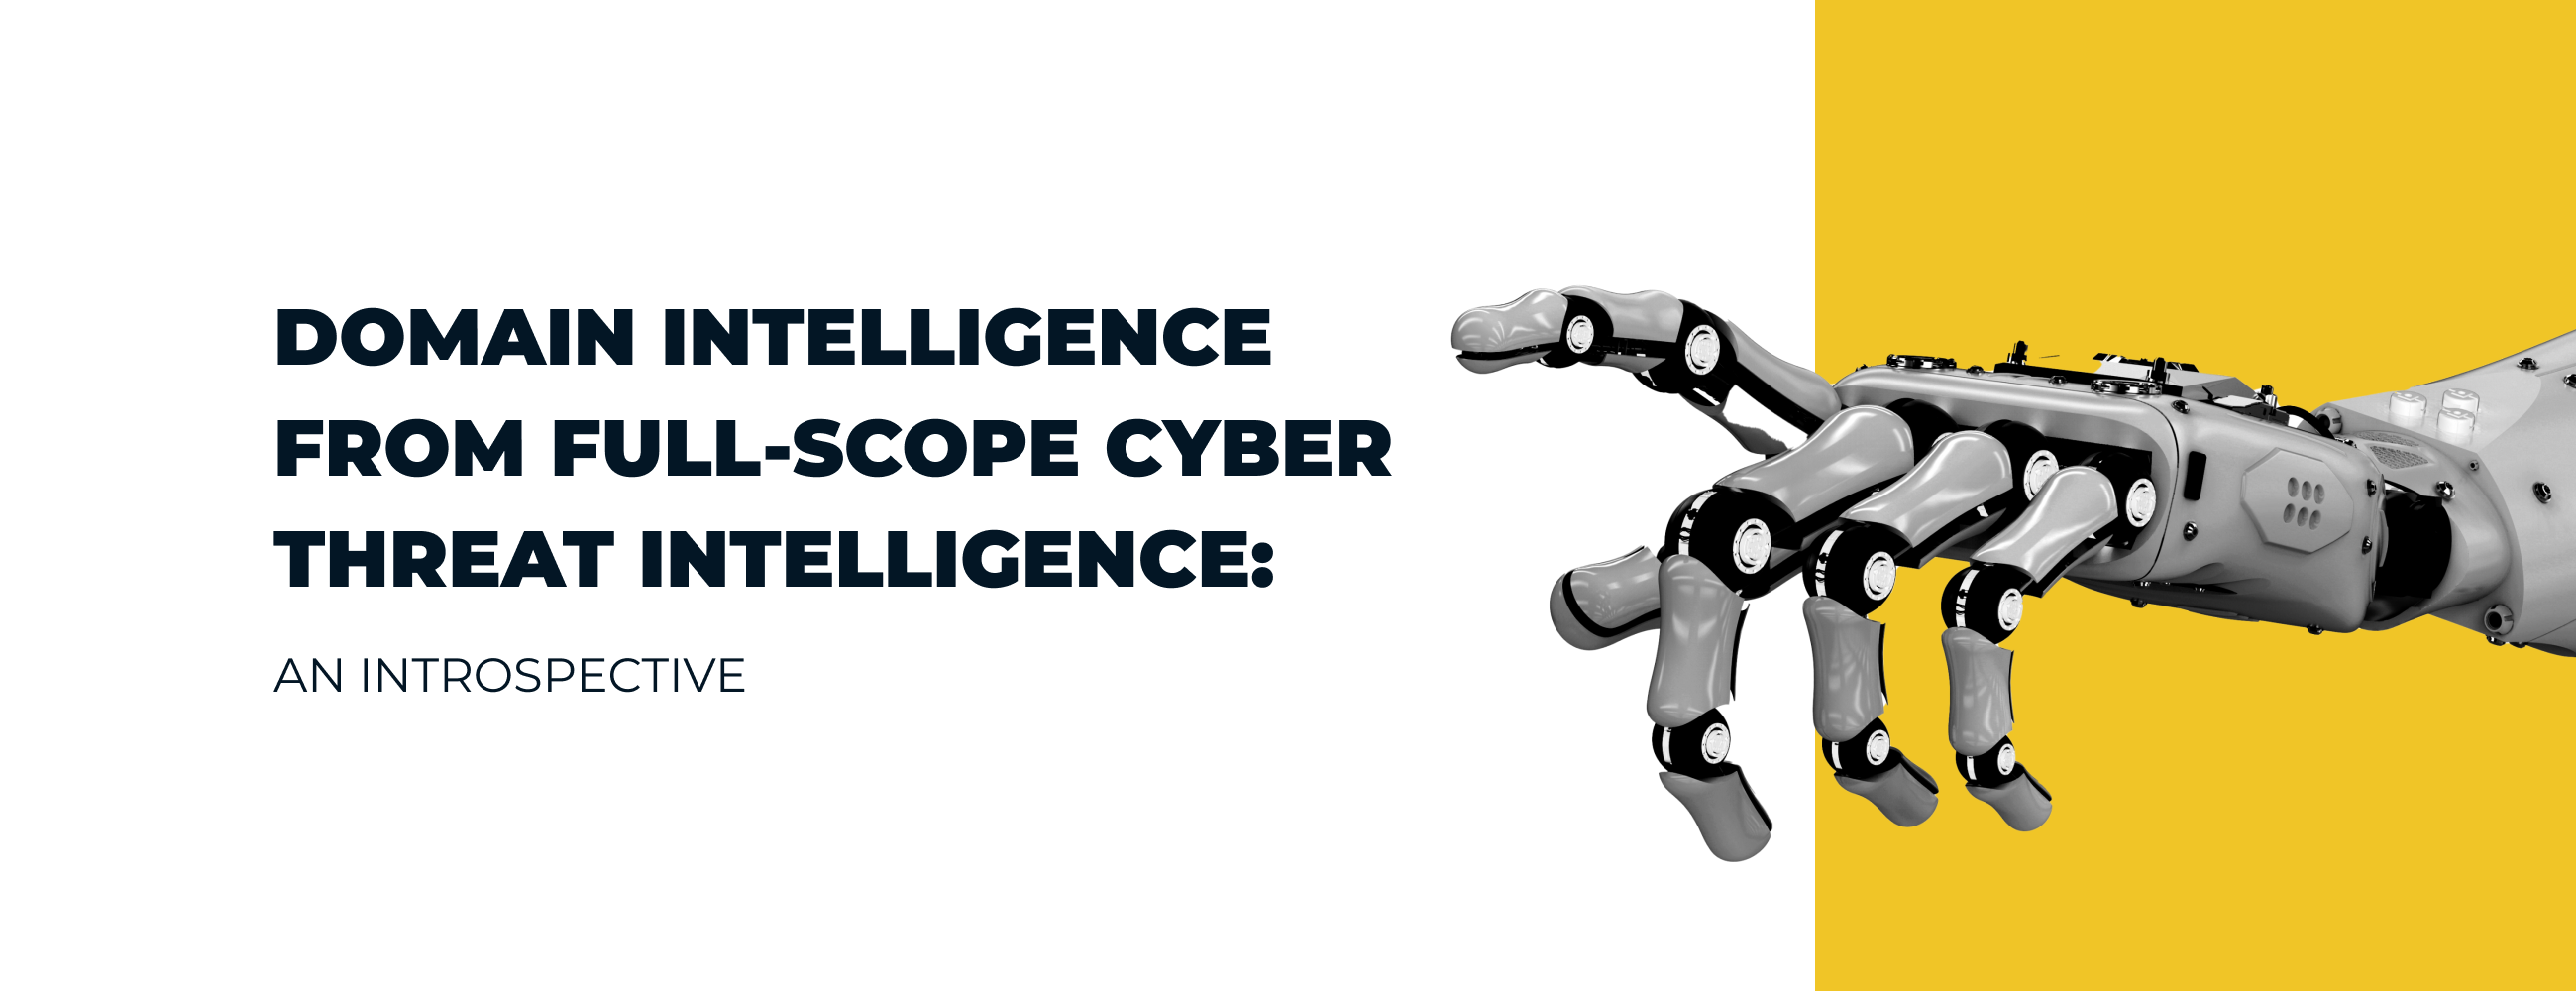 Domain Intelligence from Full-Scope Cyber Threat Intelligence: An Introspective